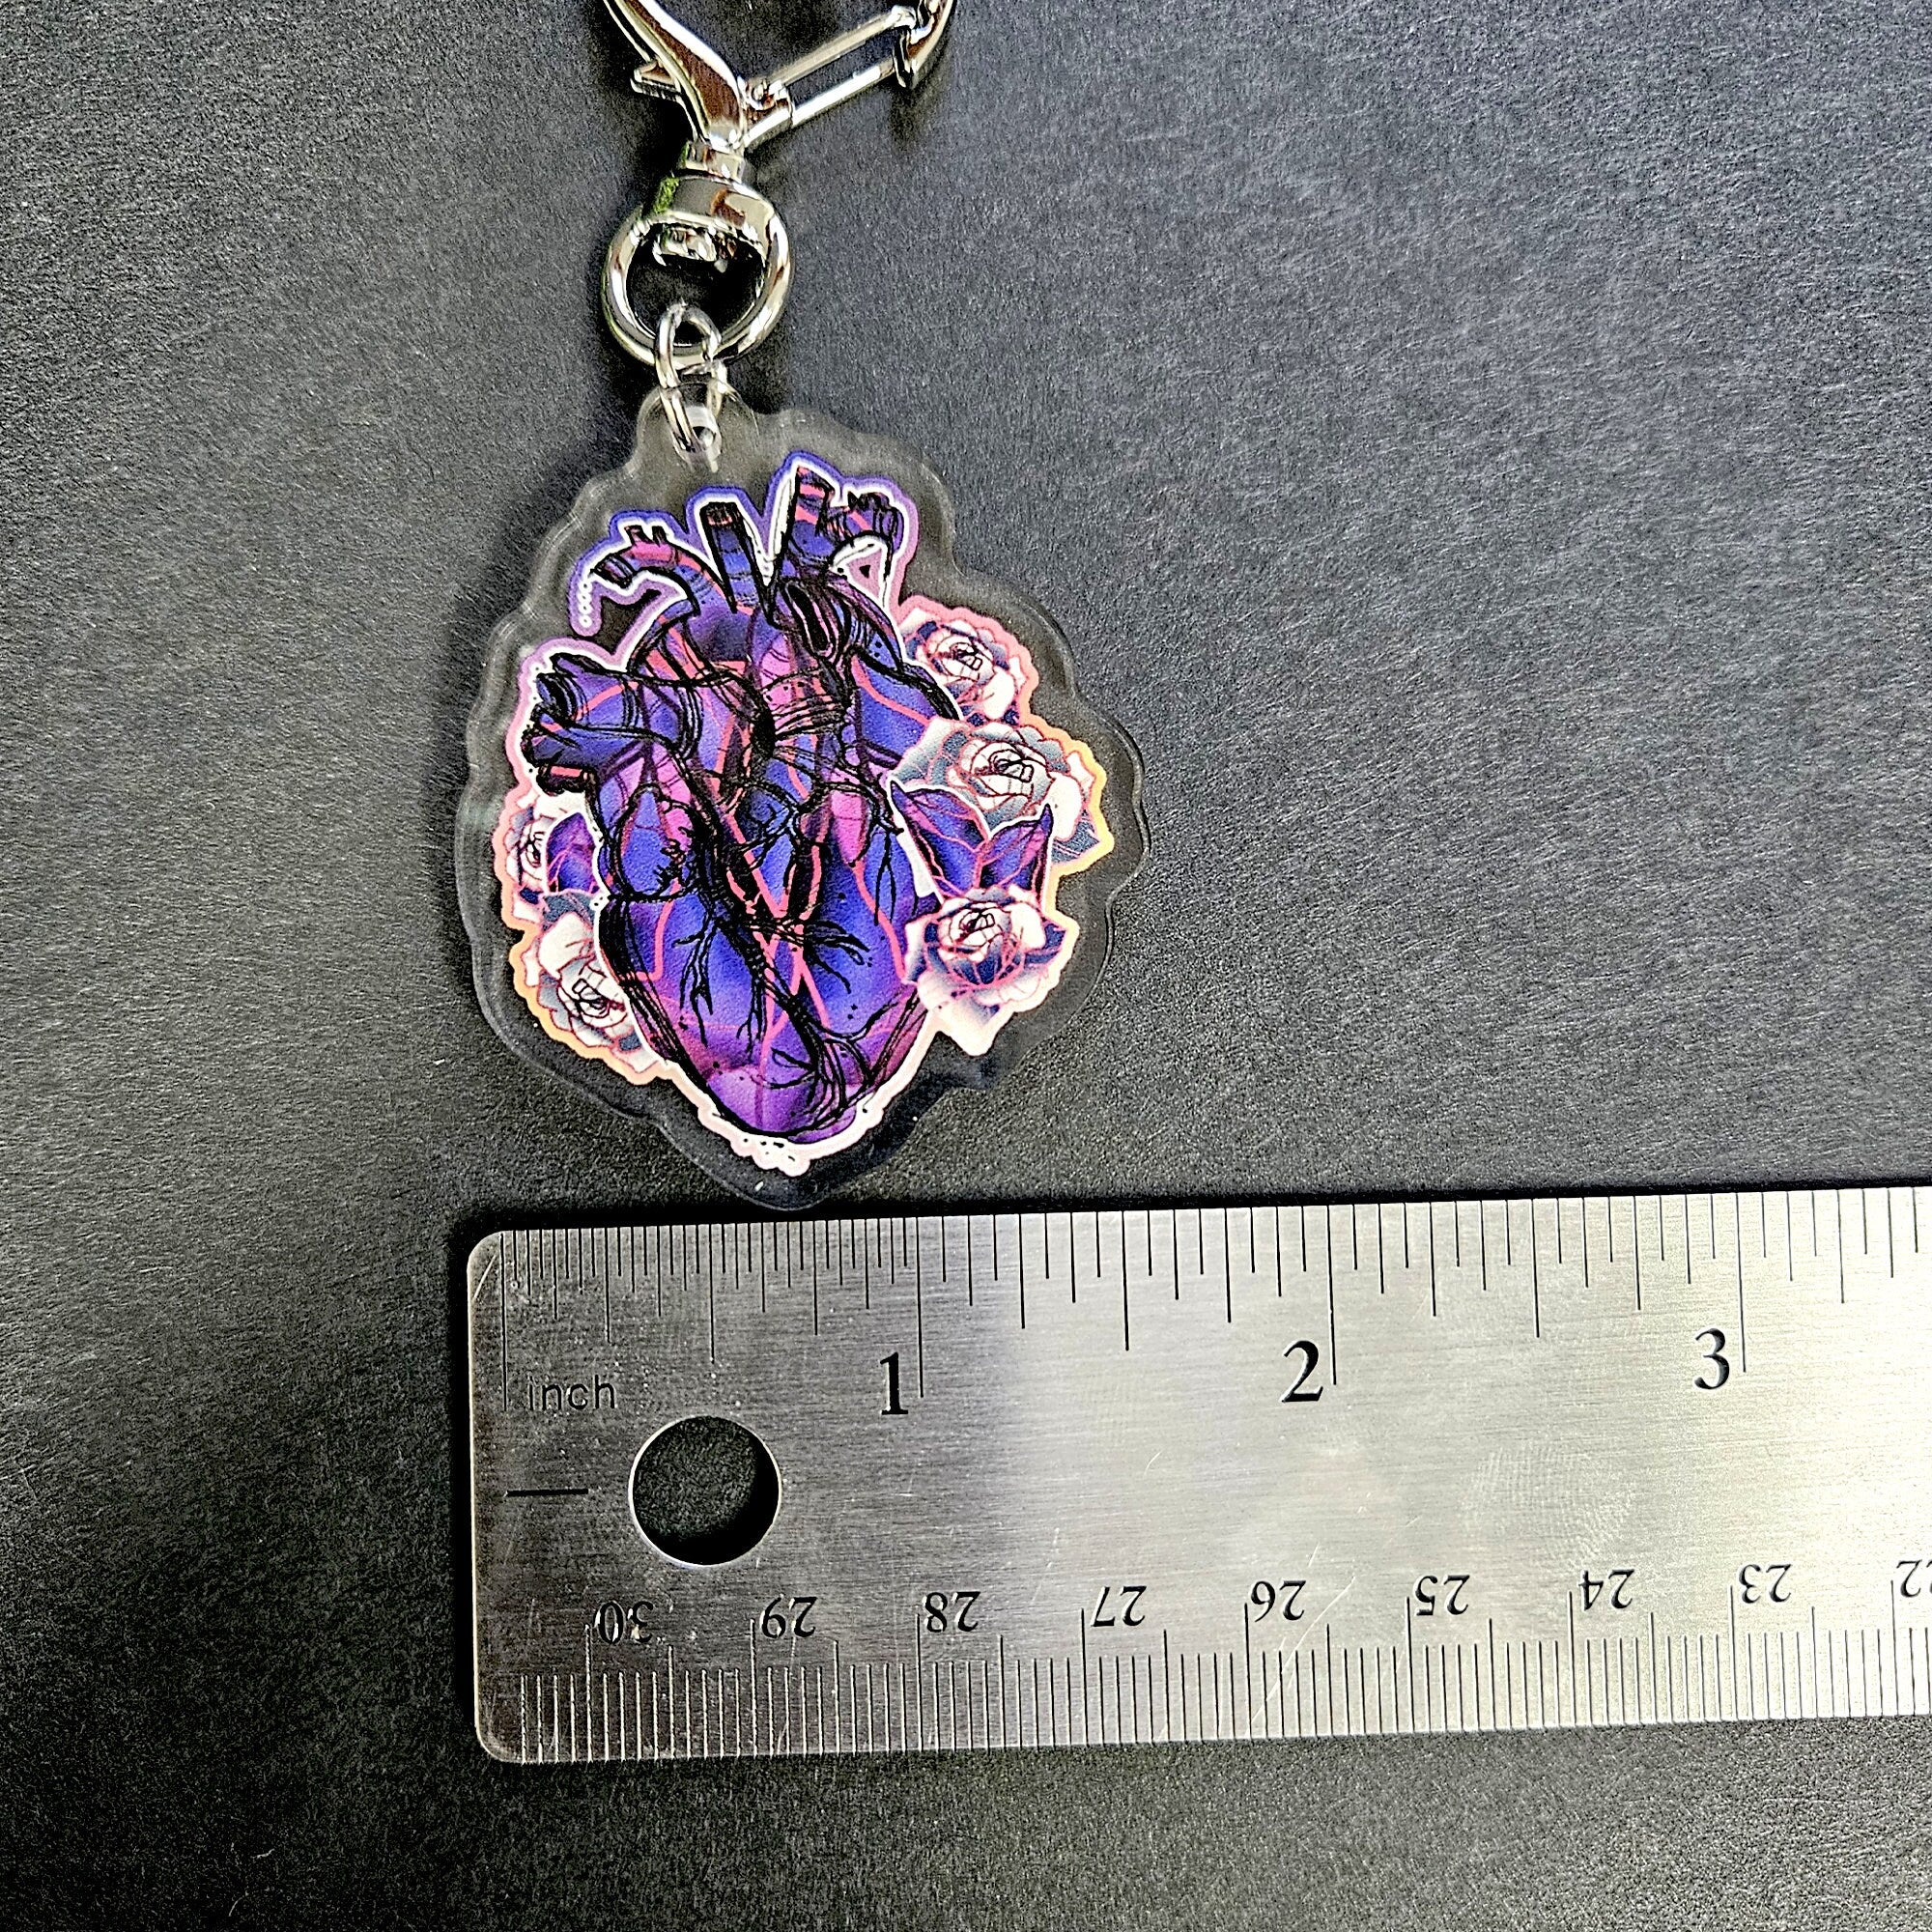 WRISTLET with Double Sided Charm: Alexandrite Crystal Heart